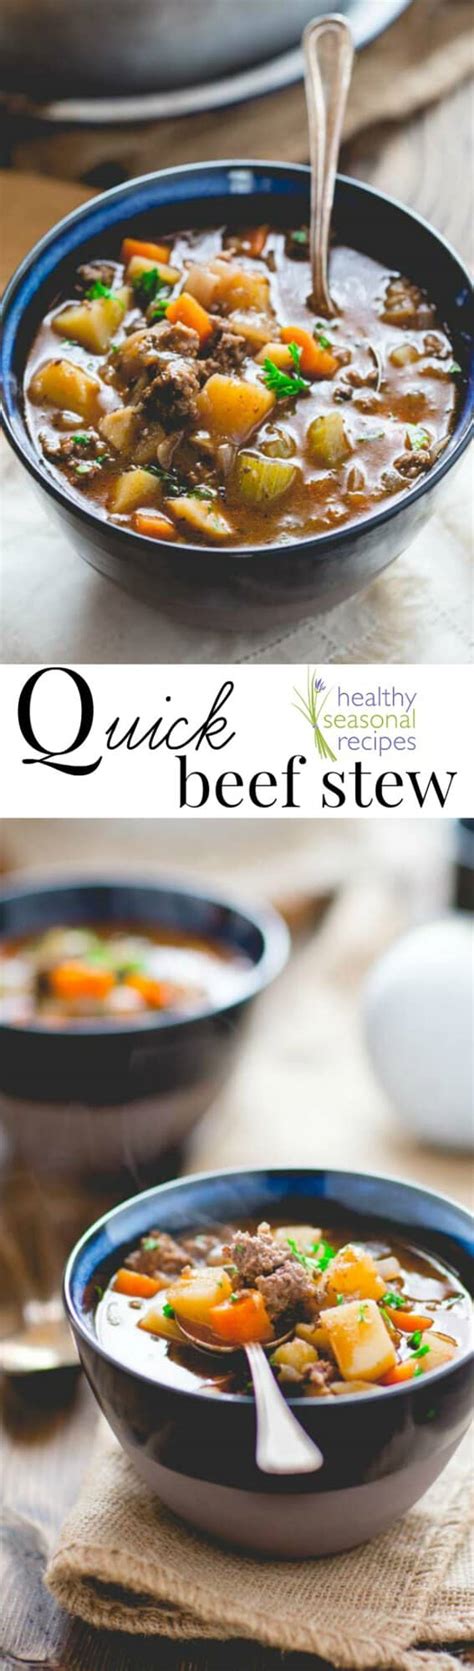 Stew meat is a healthy meal because there's no frying process and no oily sauces. quick beef stew - Healthy Seasonal Recipes